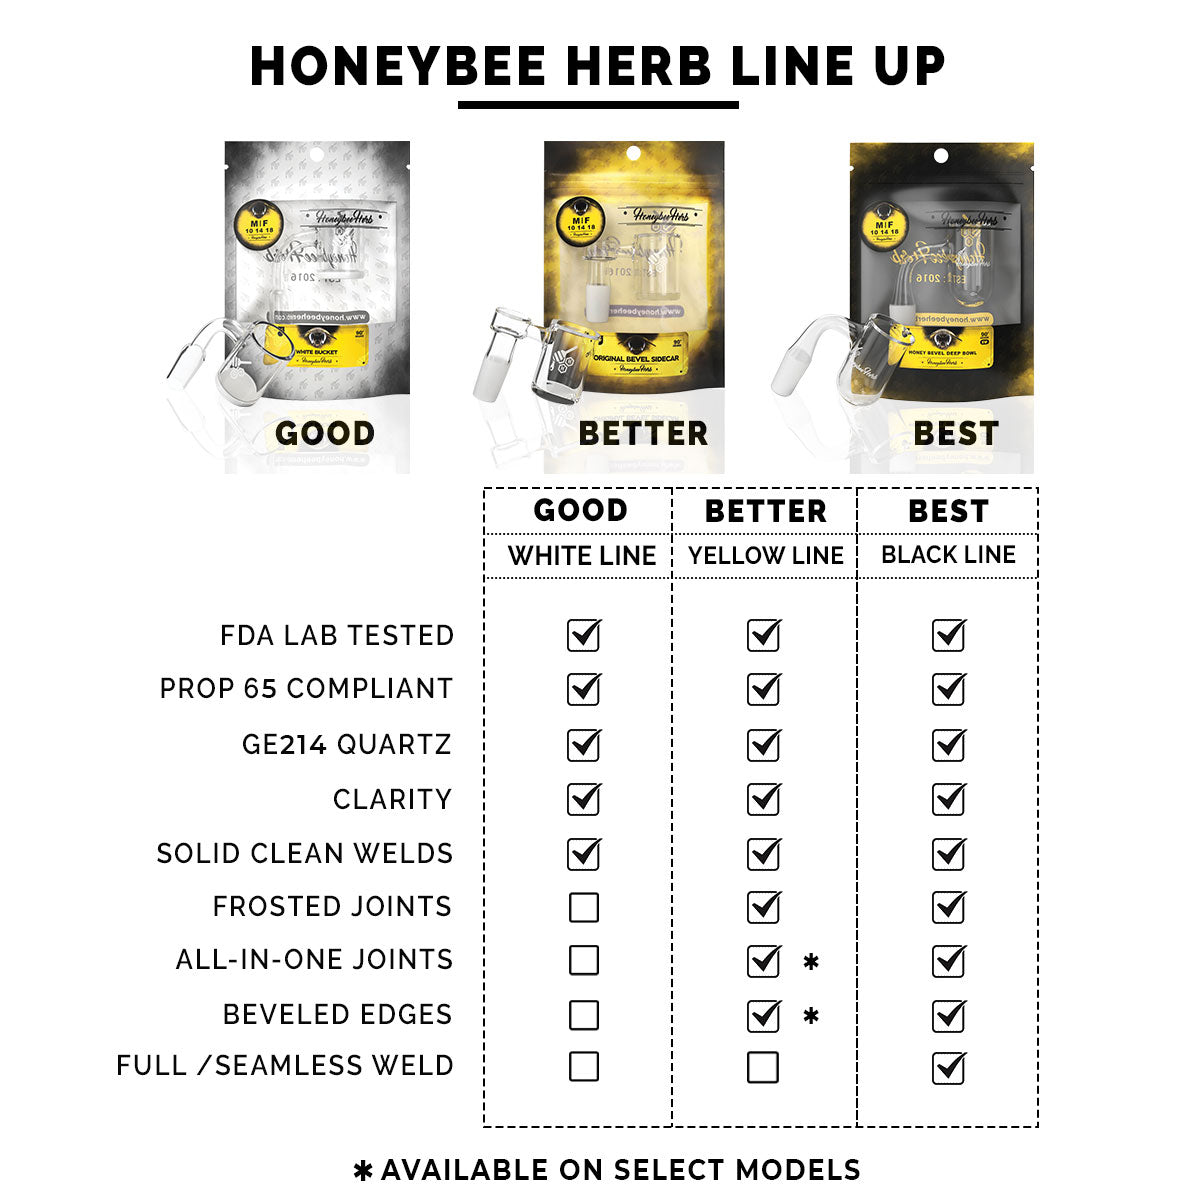 Honeybee Herb Quartz Banger Comparison Chart with Quality Tiers and Features